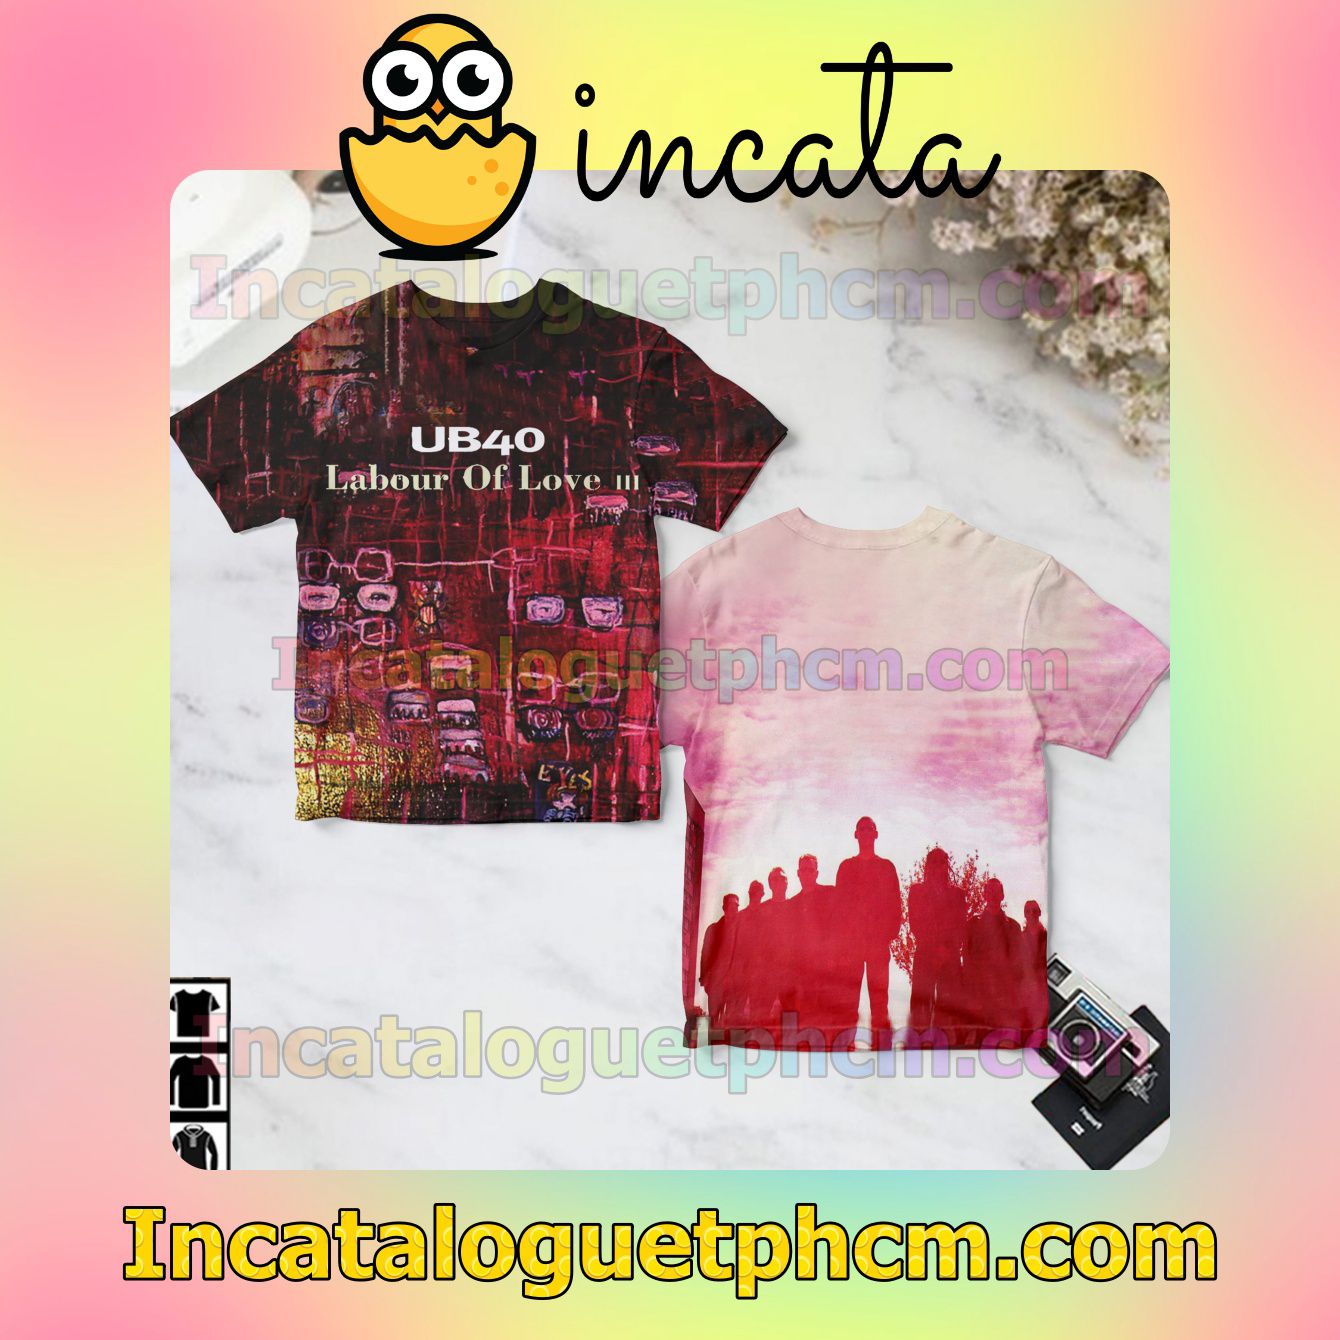 Labour Of Love III Album Cover By Ub40 Gift Shirt